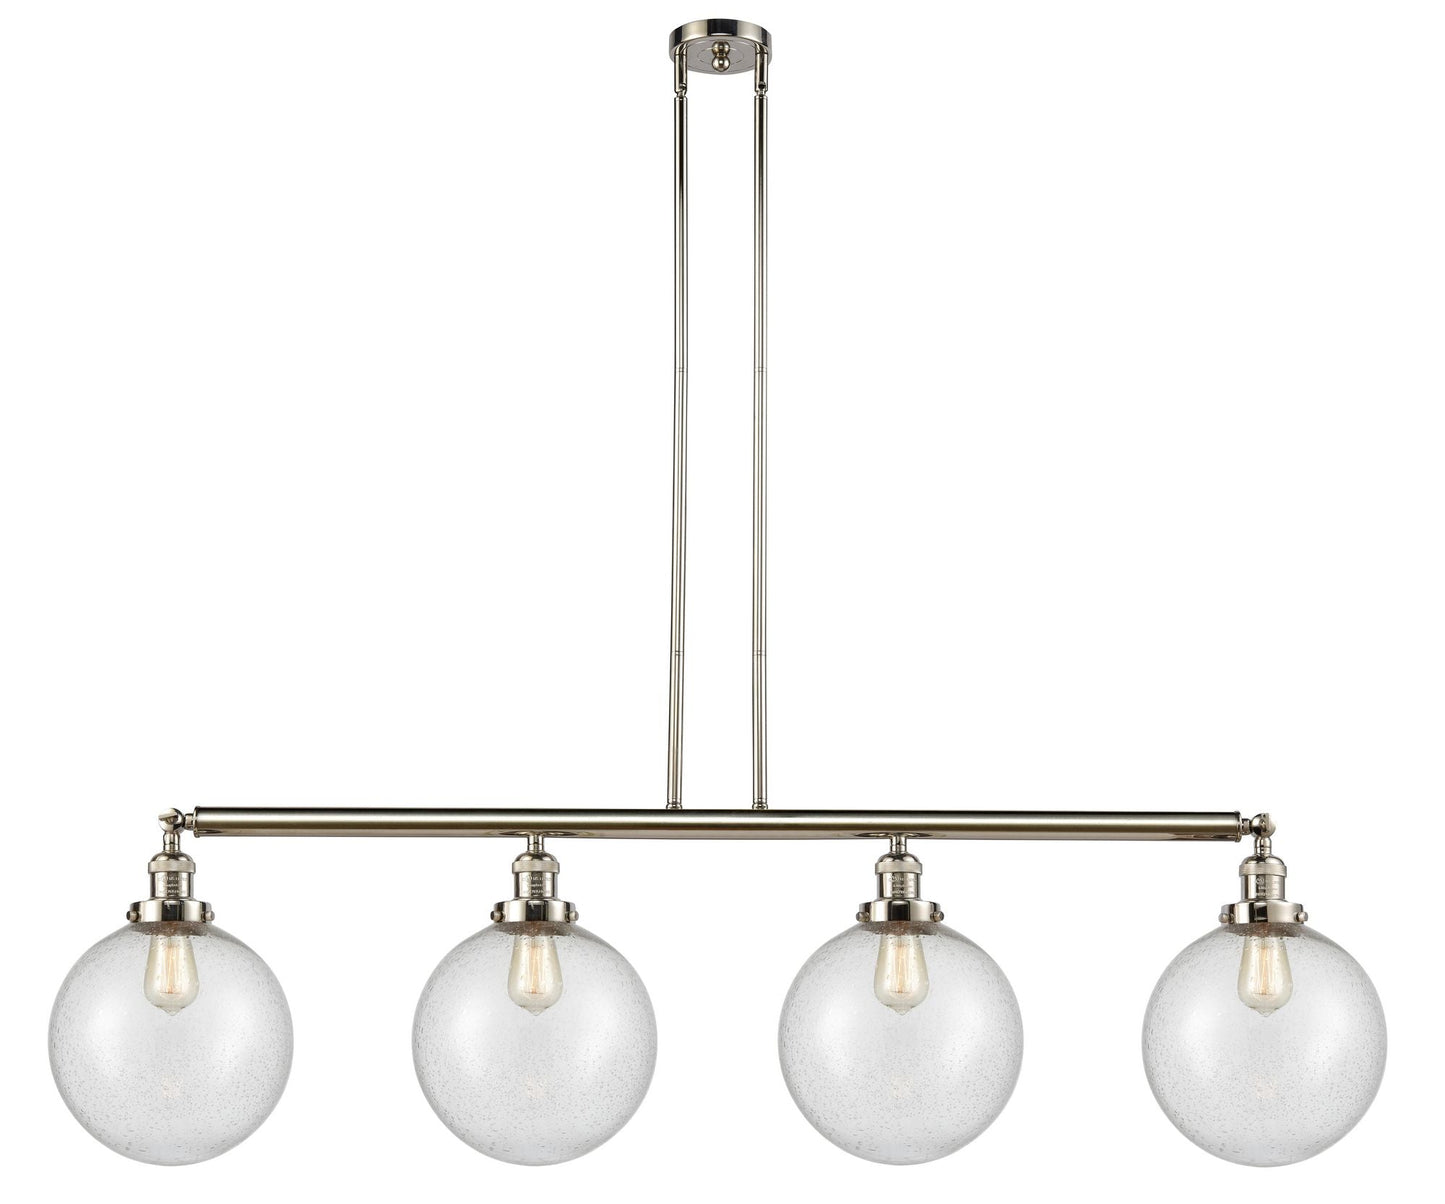 214-PN-G204-10 4-Light 54" Polished Nickel Island Light - Seedy Beacon Glass - LED Bulb - Dimmensions: 54 x 10 x 14<br>Minimum Height : 24<br>Maximum Height : 48 - Sloped Ceiling Compatible: Yes